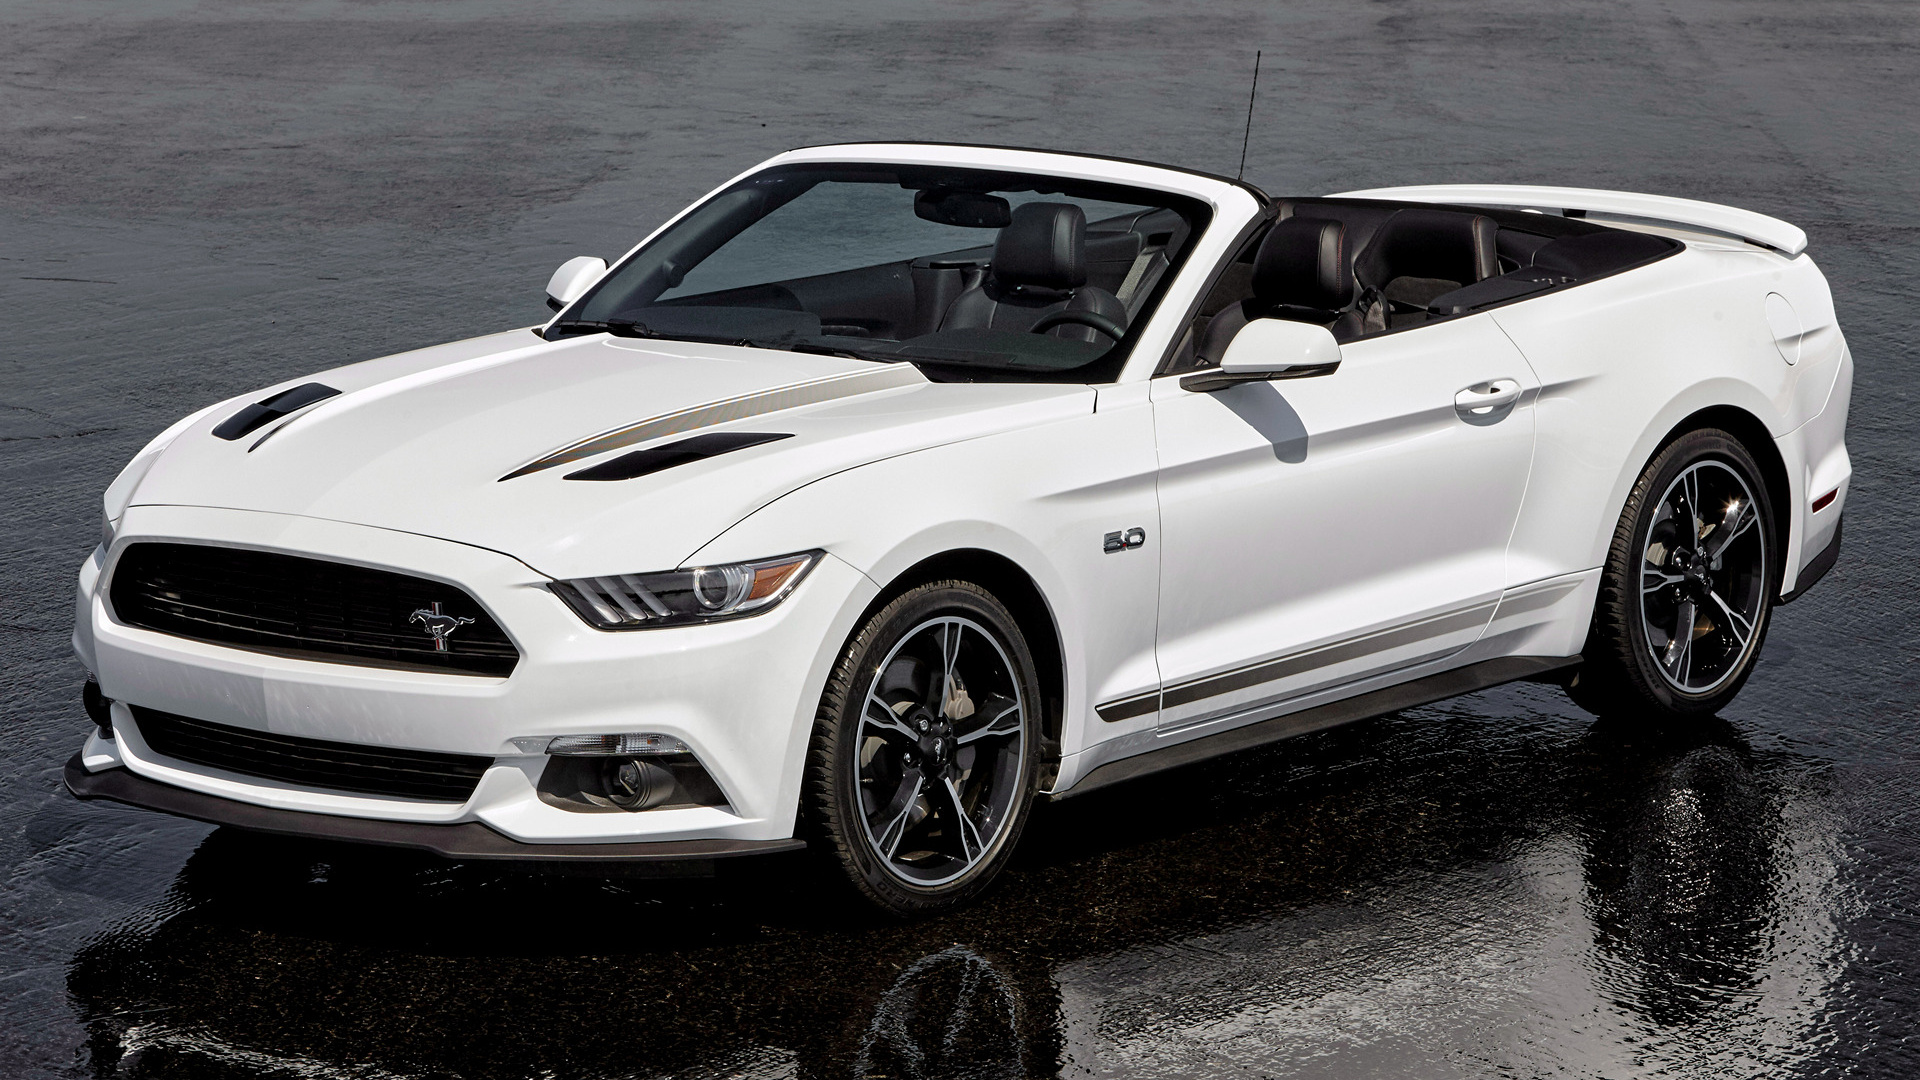 Car Convertible Ford Mustang Gt Convertible California Special Muscle Car White Car 1920x1080